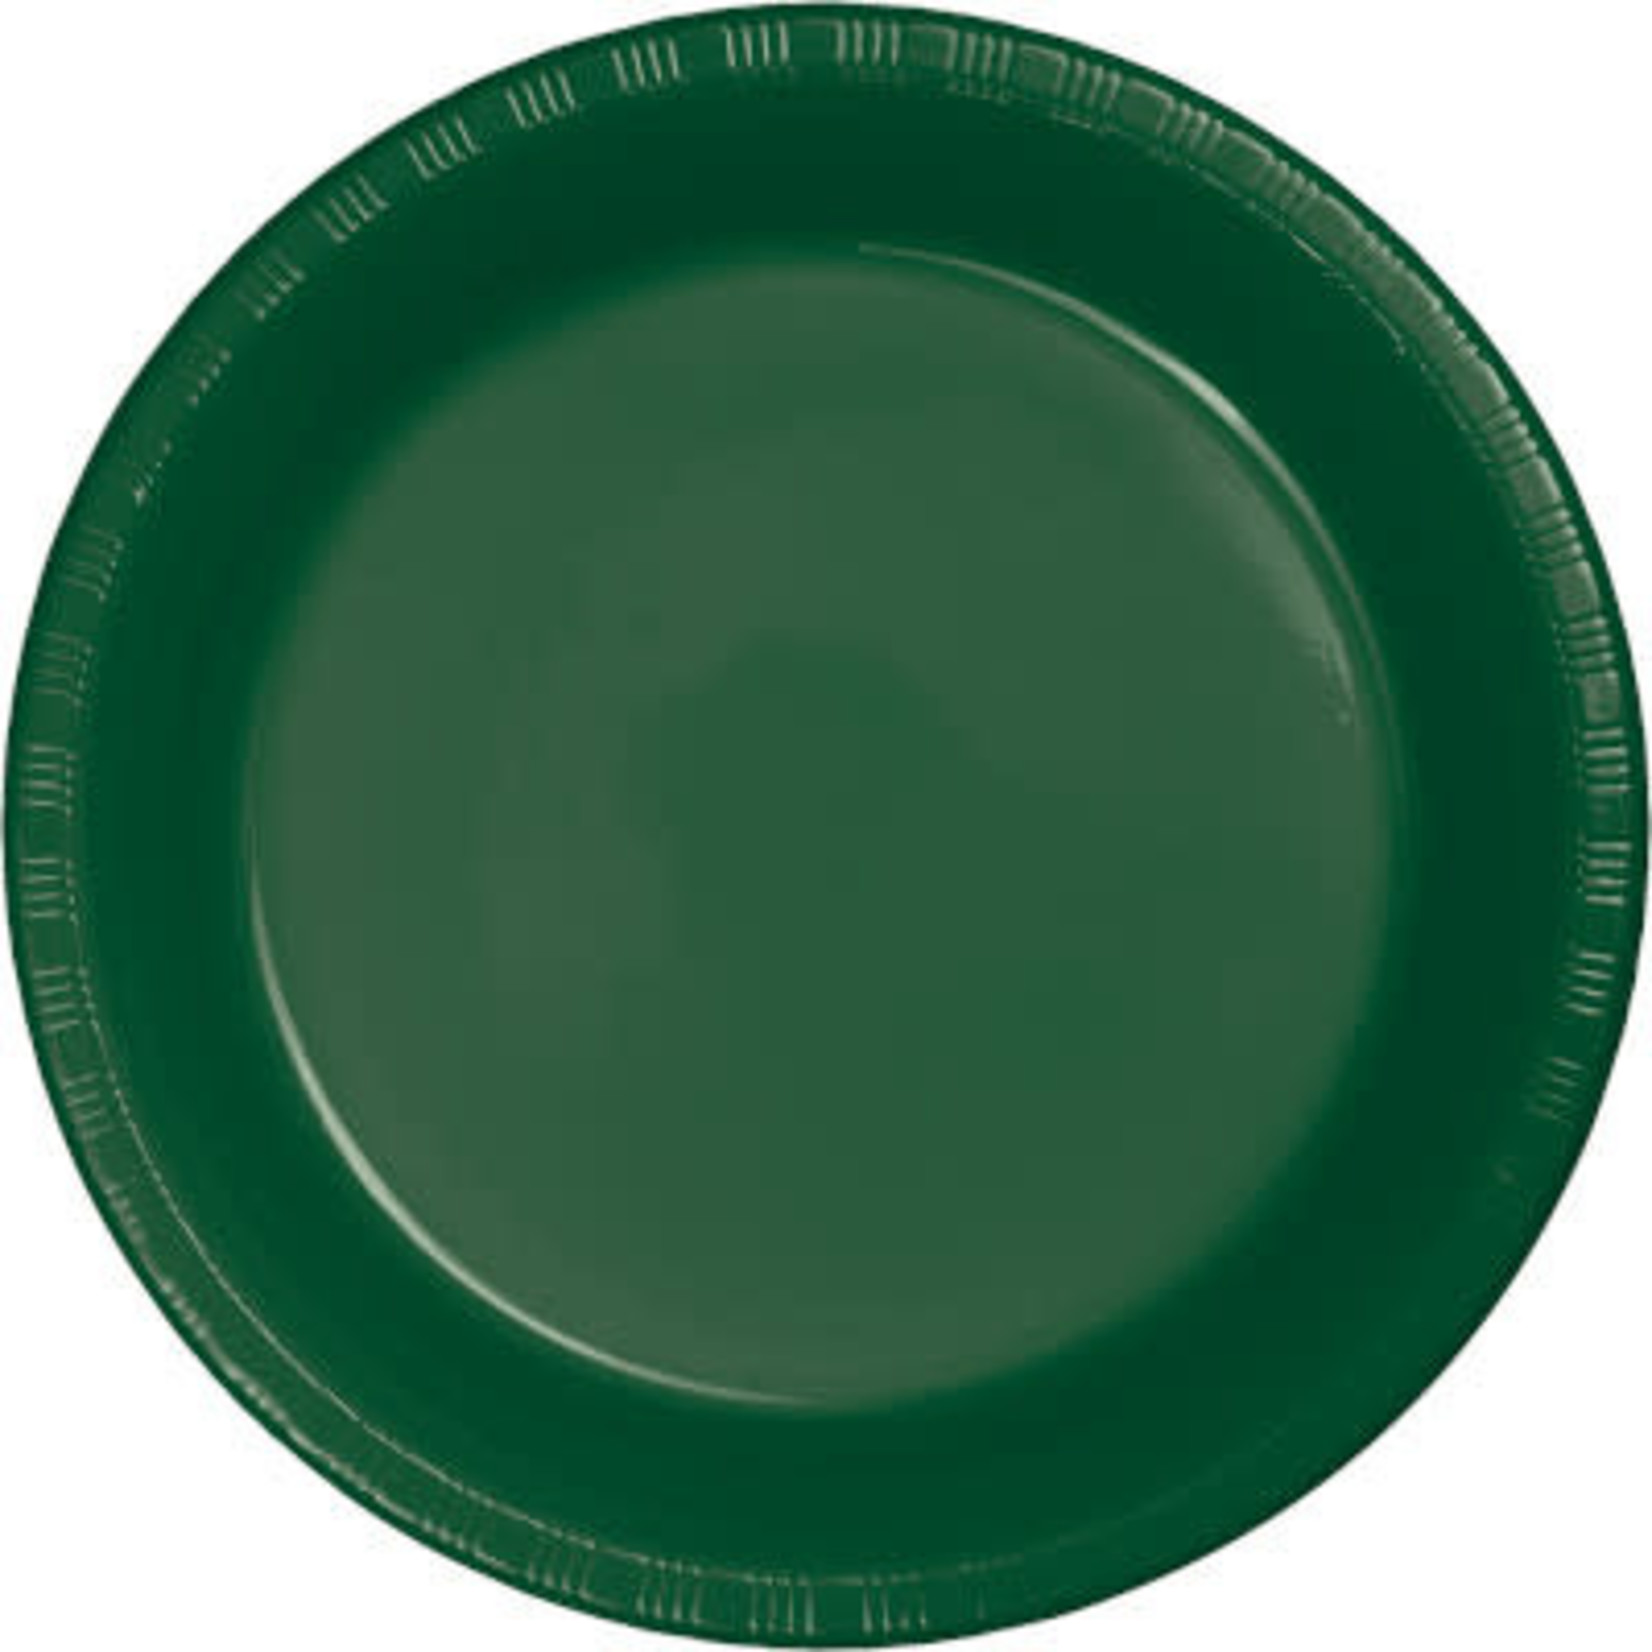 Touch of Color 7" Hunter Green Paper Plates - 24ct.